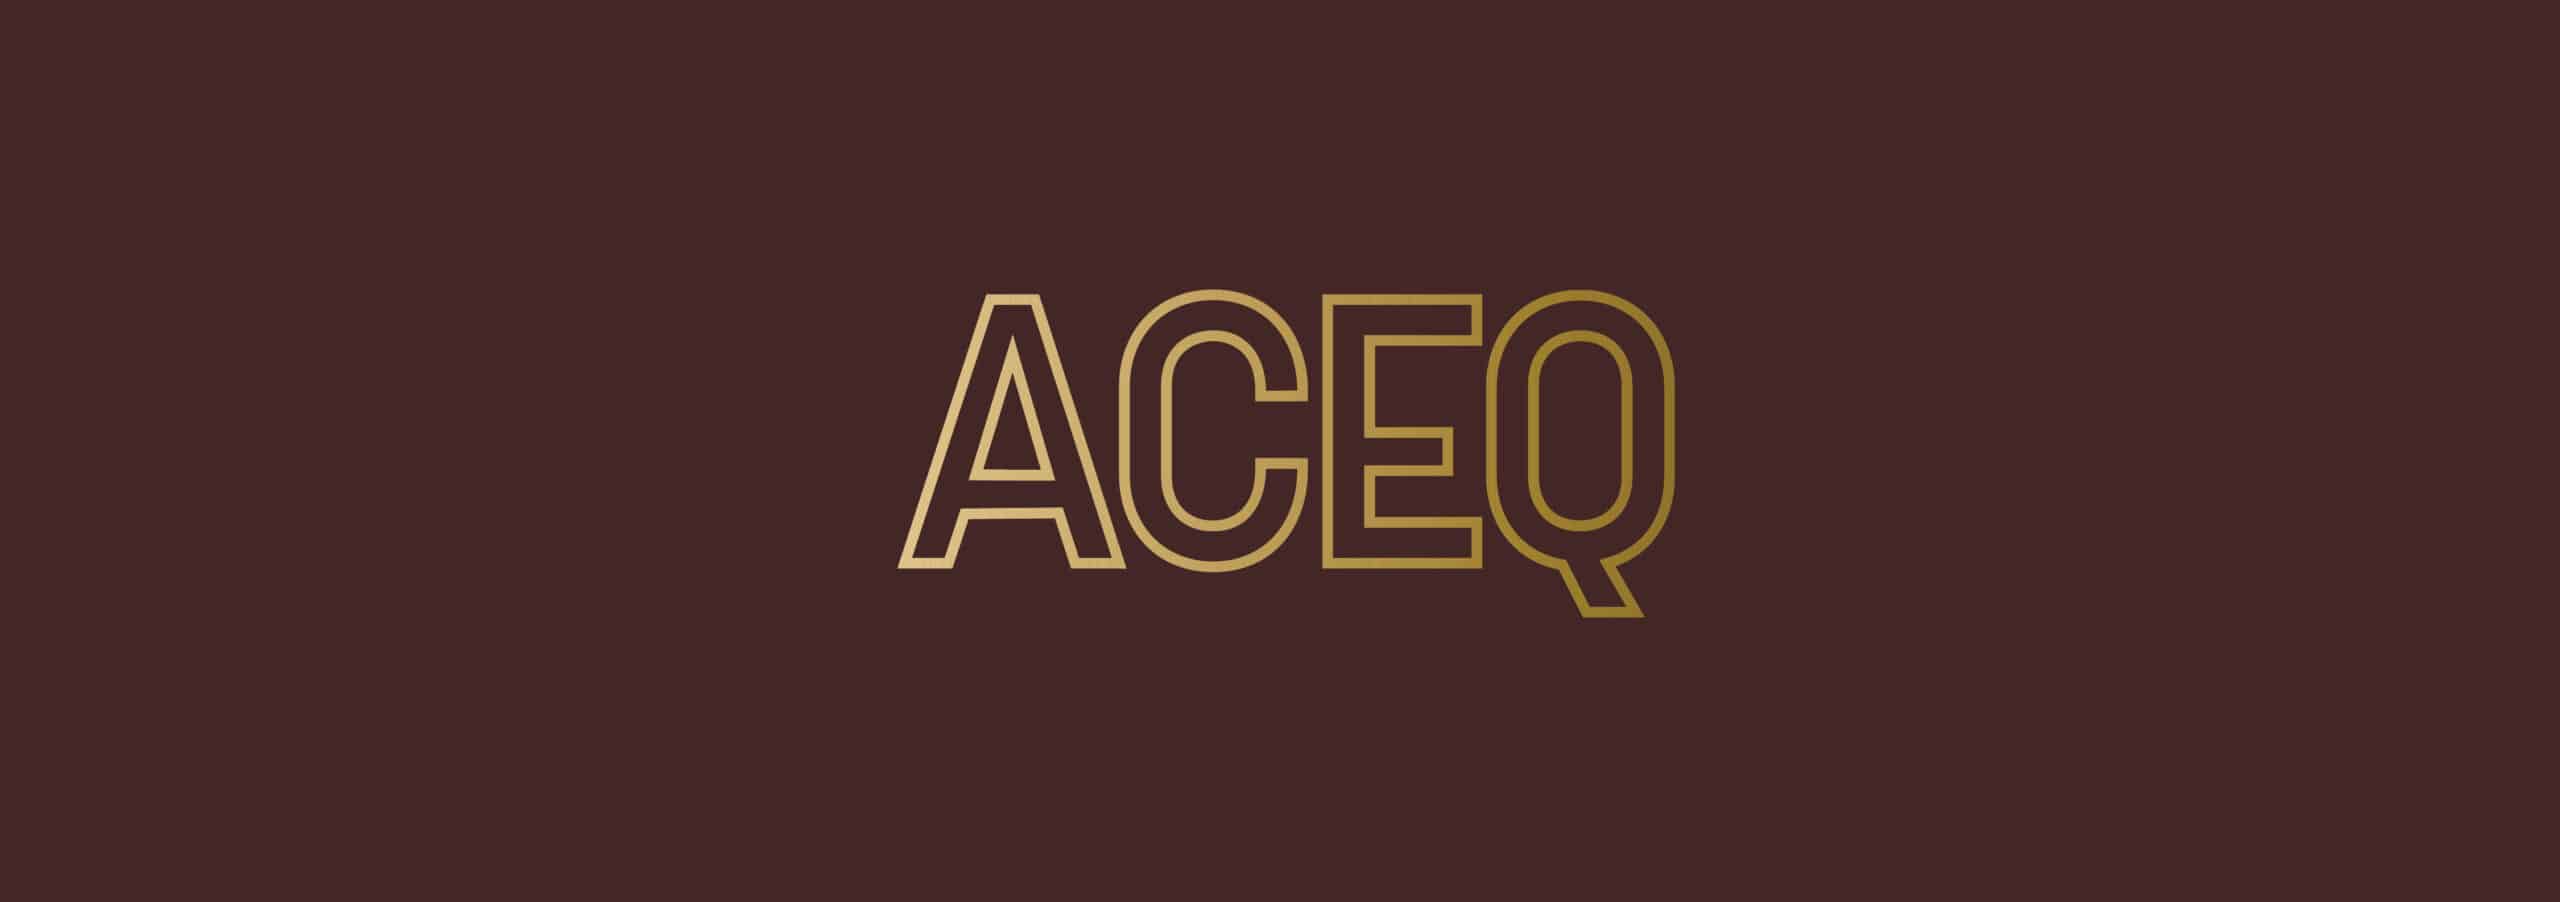 ACEQ Restaurant in Taos New Mexico Logo Design By Stellen Design Branding and Logo Design Agency in Los Angeles CA